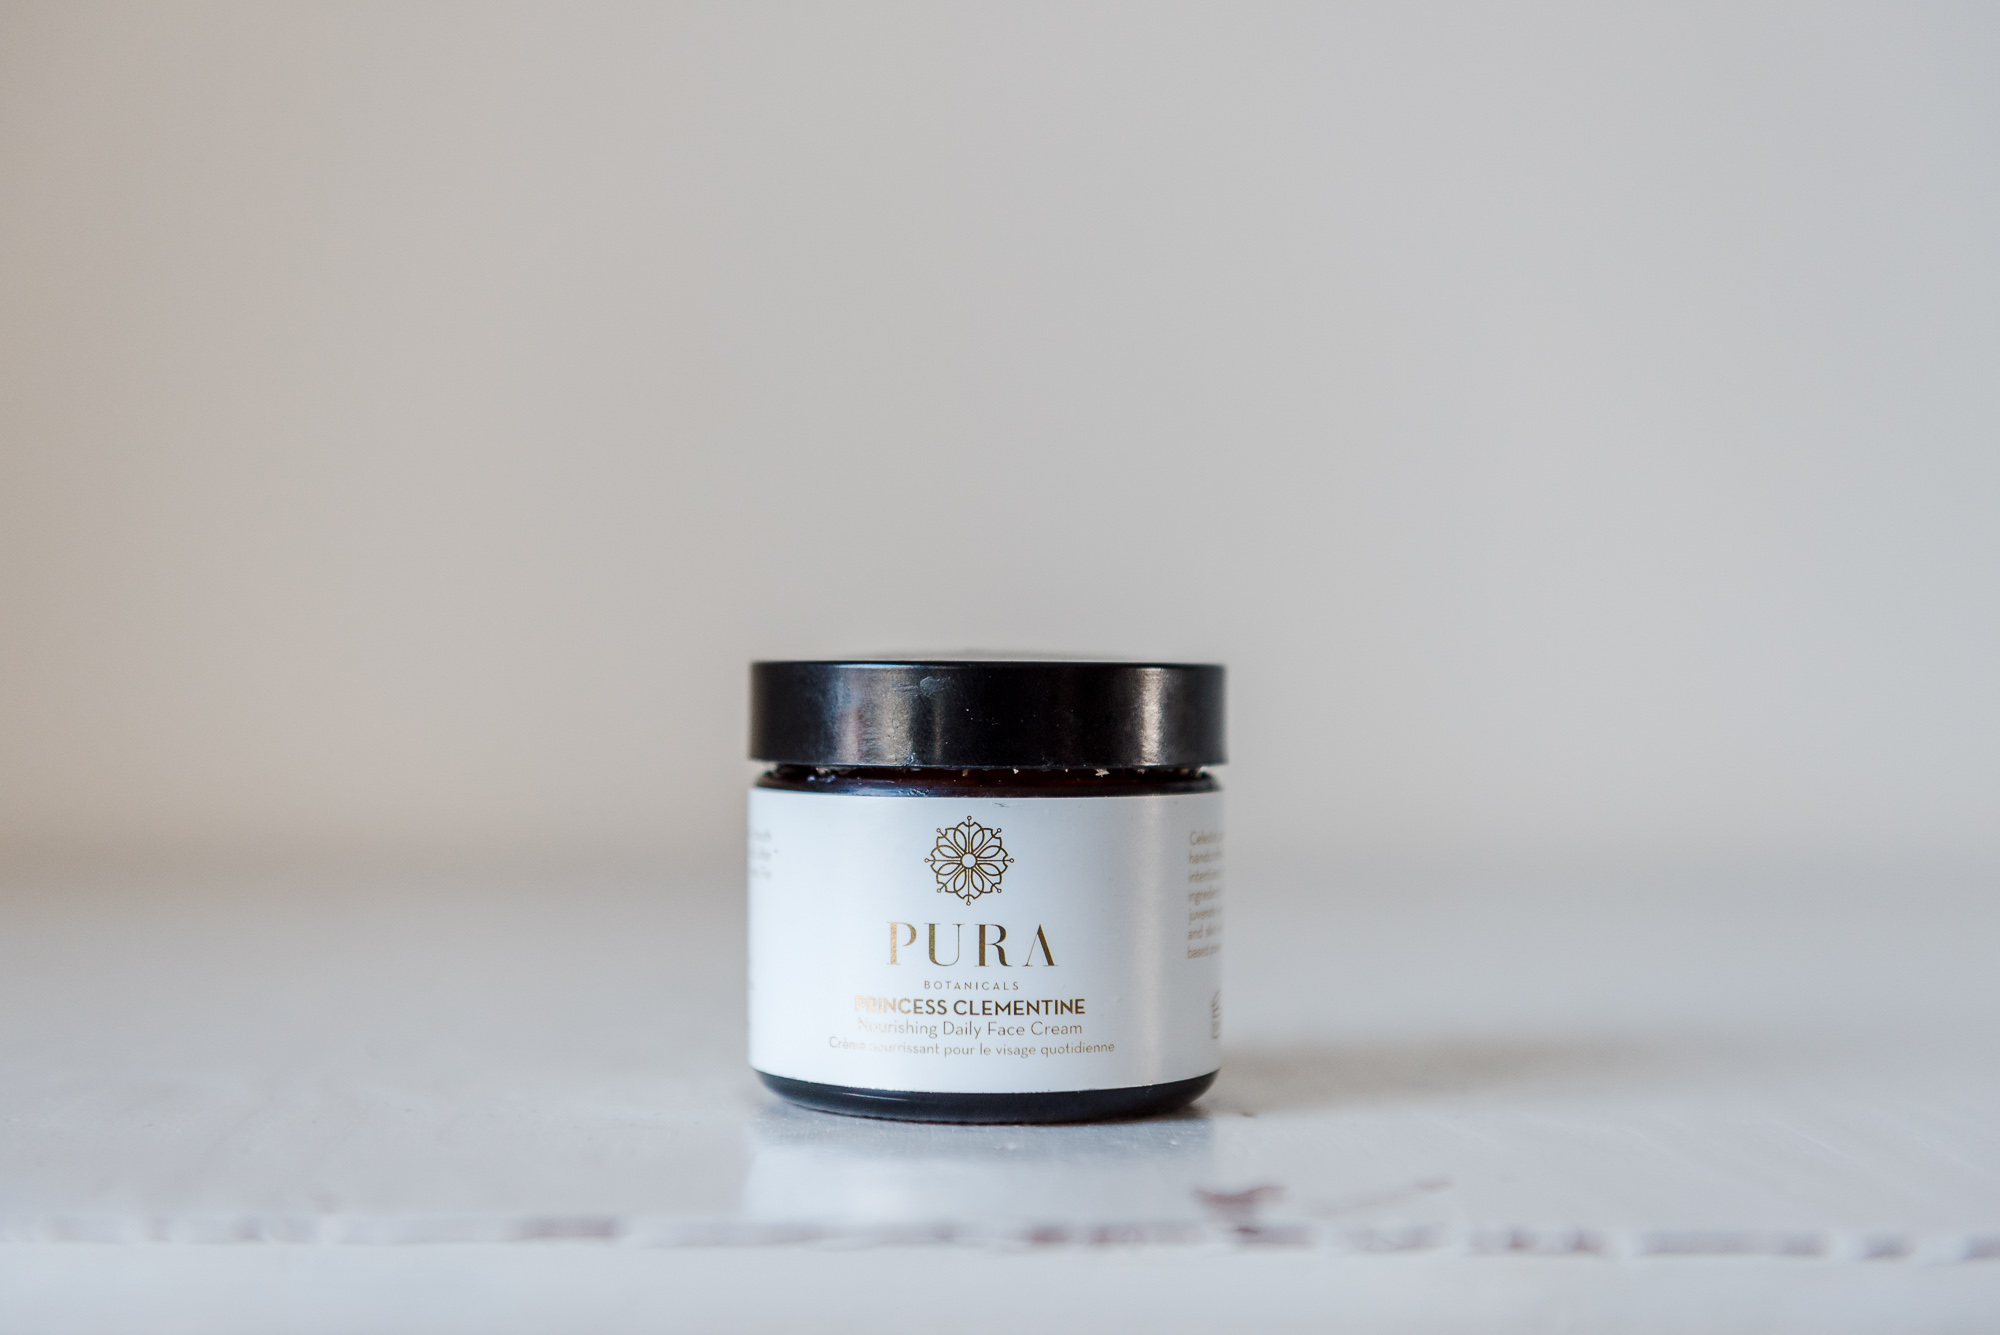 Pura Botanicals Princess Clementine Face cream - the very best natural face cream on the market!